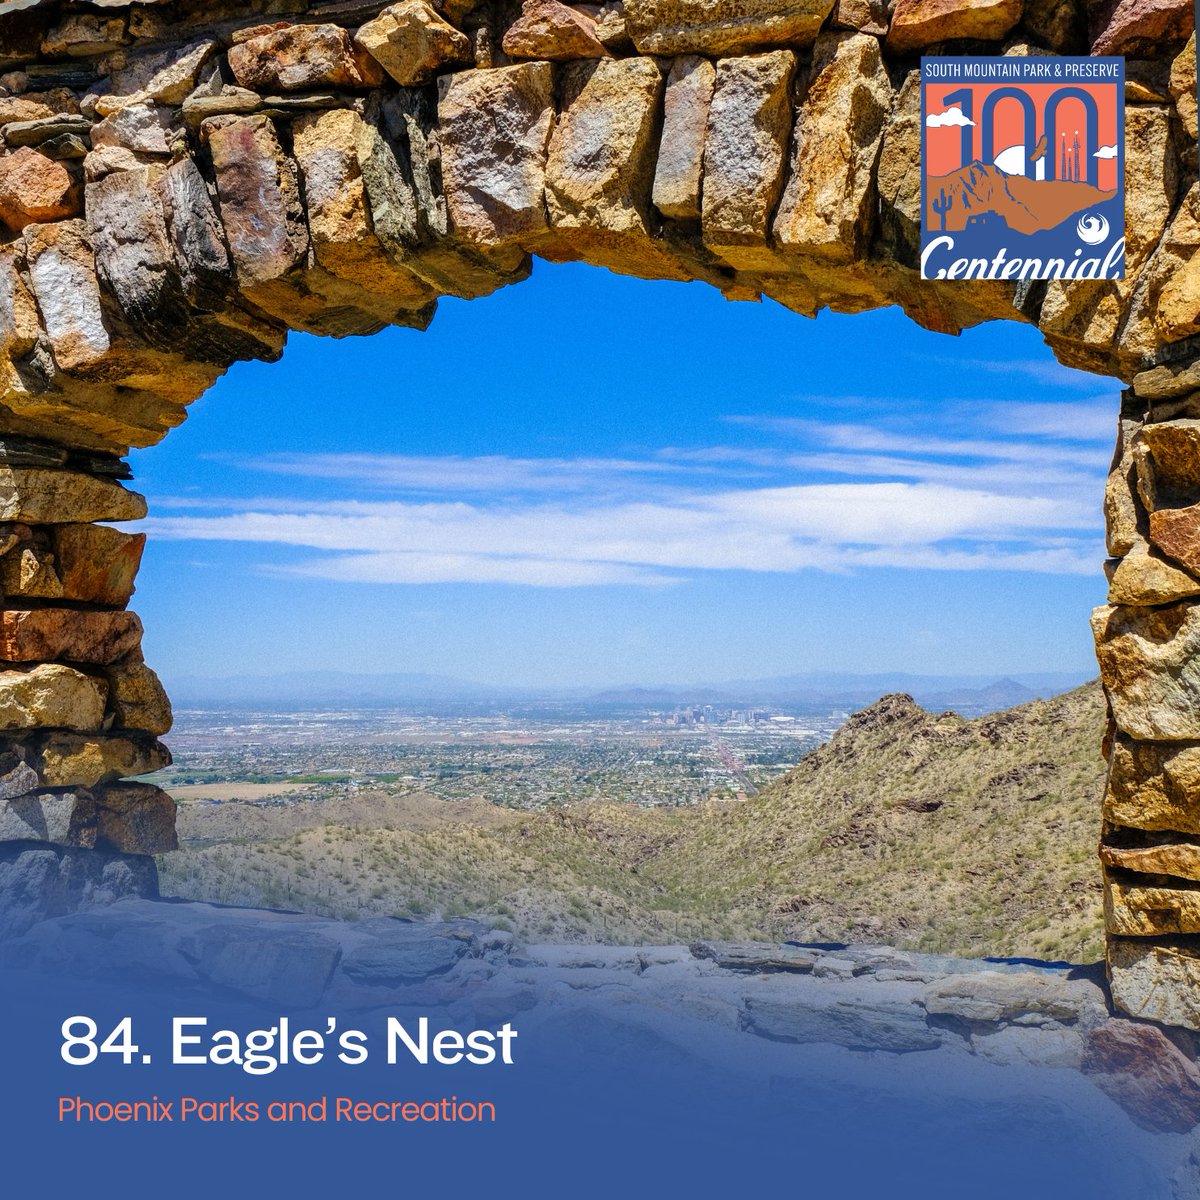 Ever ventured up the National Trail from Telegraph Pass Rd? 🥾🌵🌞 Hike it up to a structure our Park Rangers lovingly dubbed the “Eagle’s Nest”. ⛏ Built by the CCC, the Eagle’s Nest offers views that are totally worth the climb. 💪😎✨ #southmountain100 #phxparks